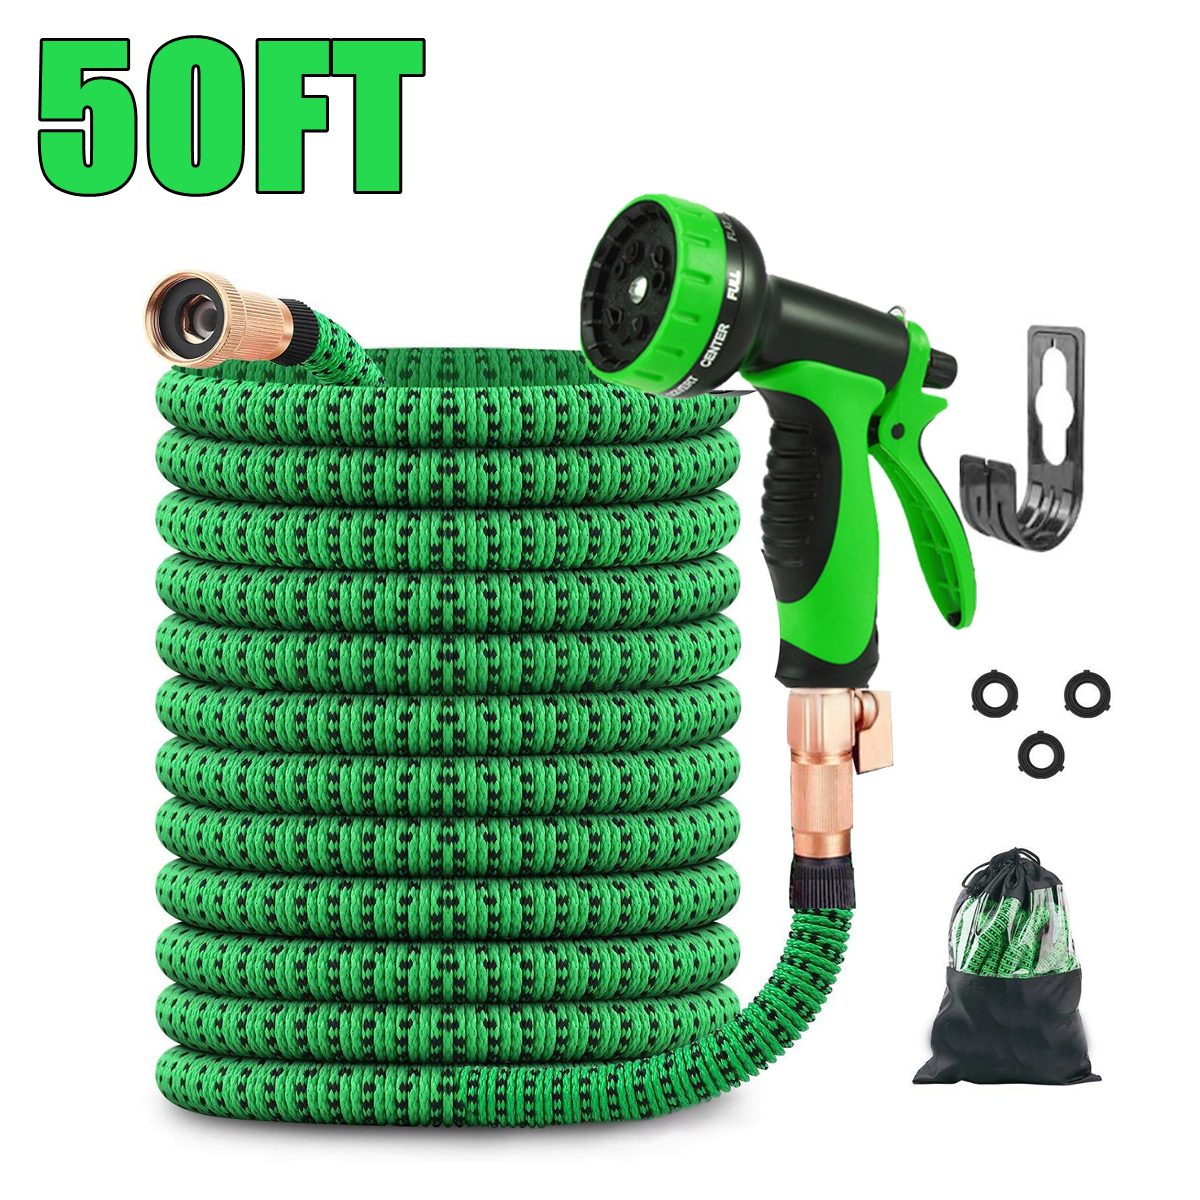 50/75/100FT Upgraded Expandable Garden Water Hose Function Spray Nozzle Green